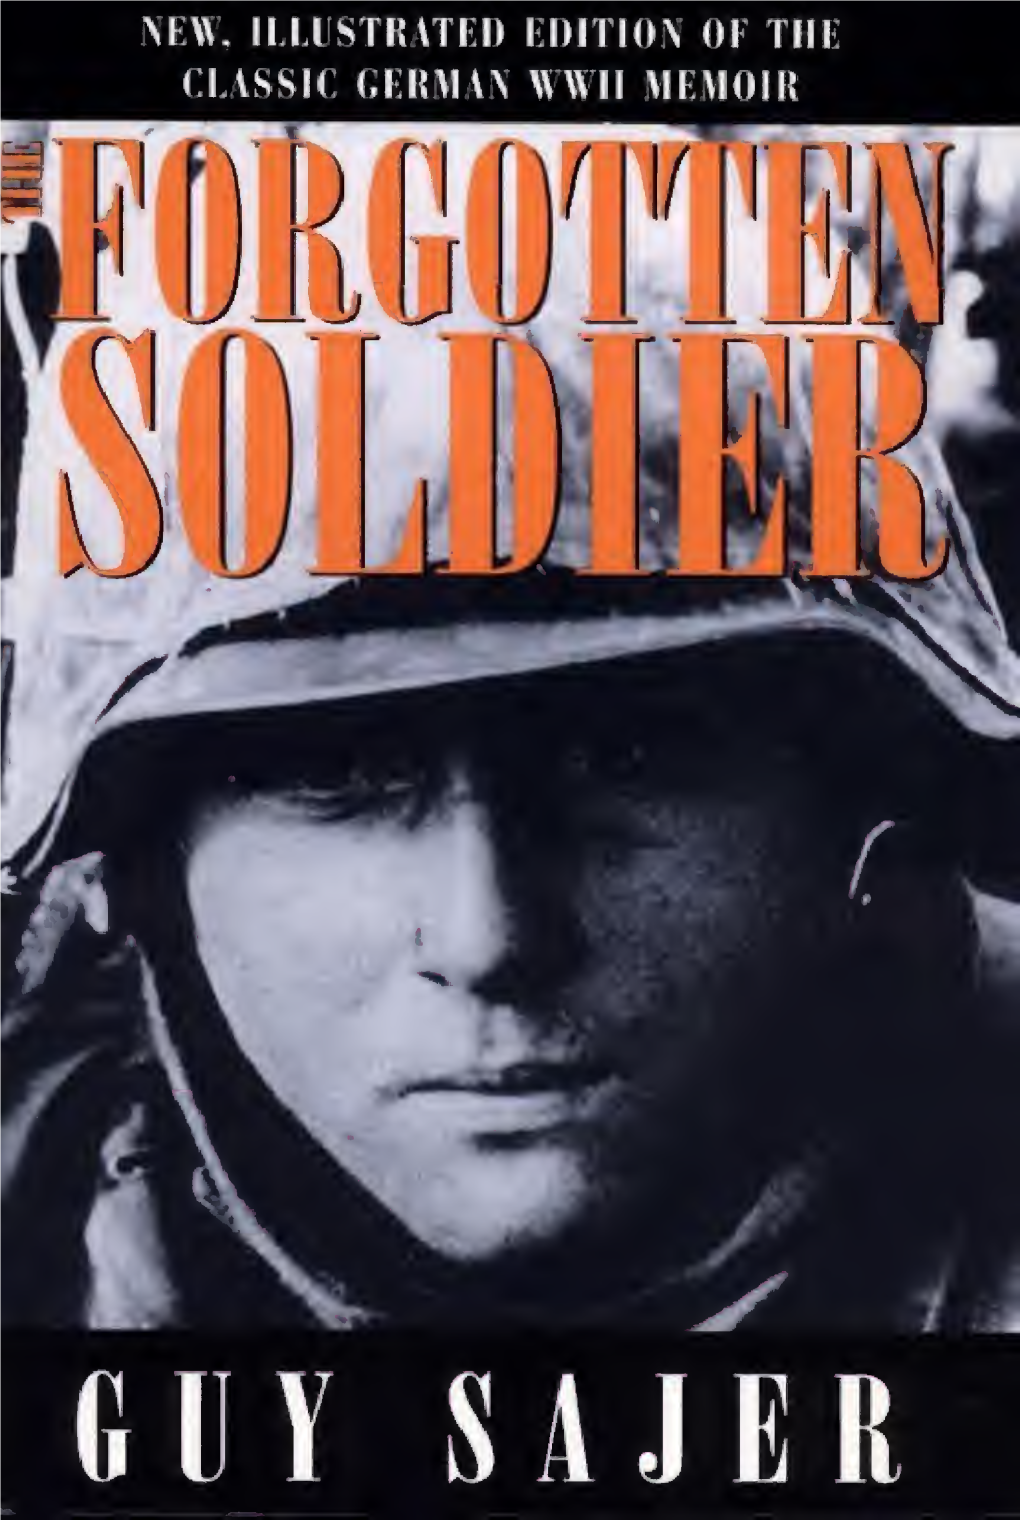 The Forgotten Soldier by Guy Sajer ( 1967)